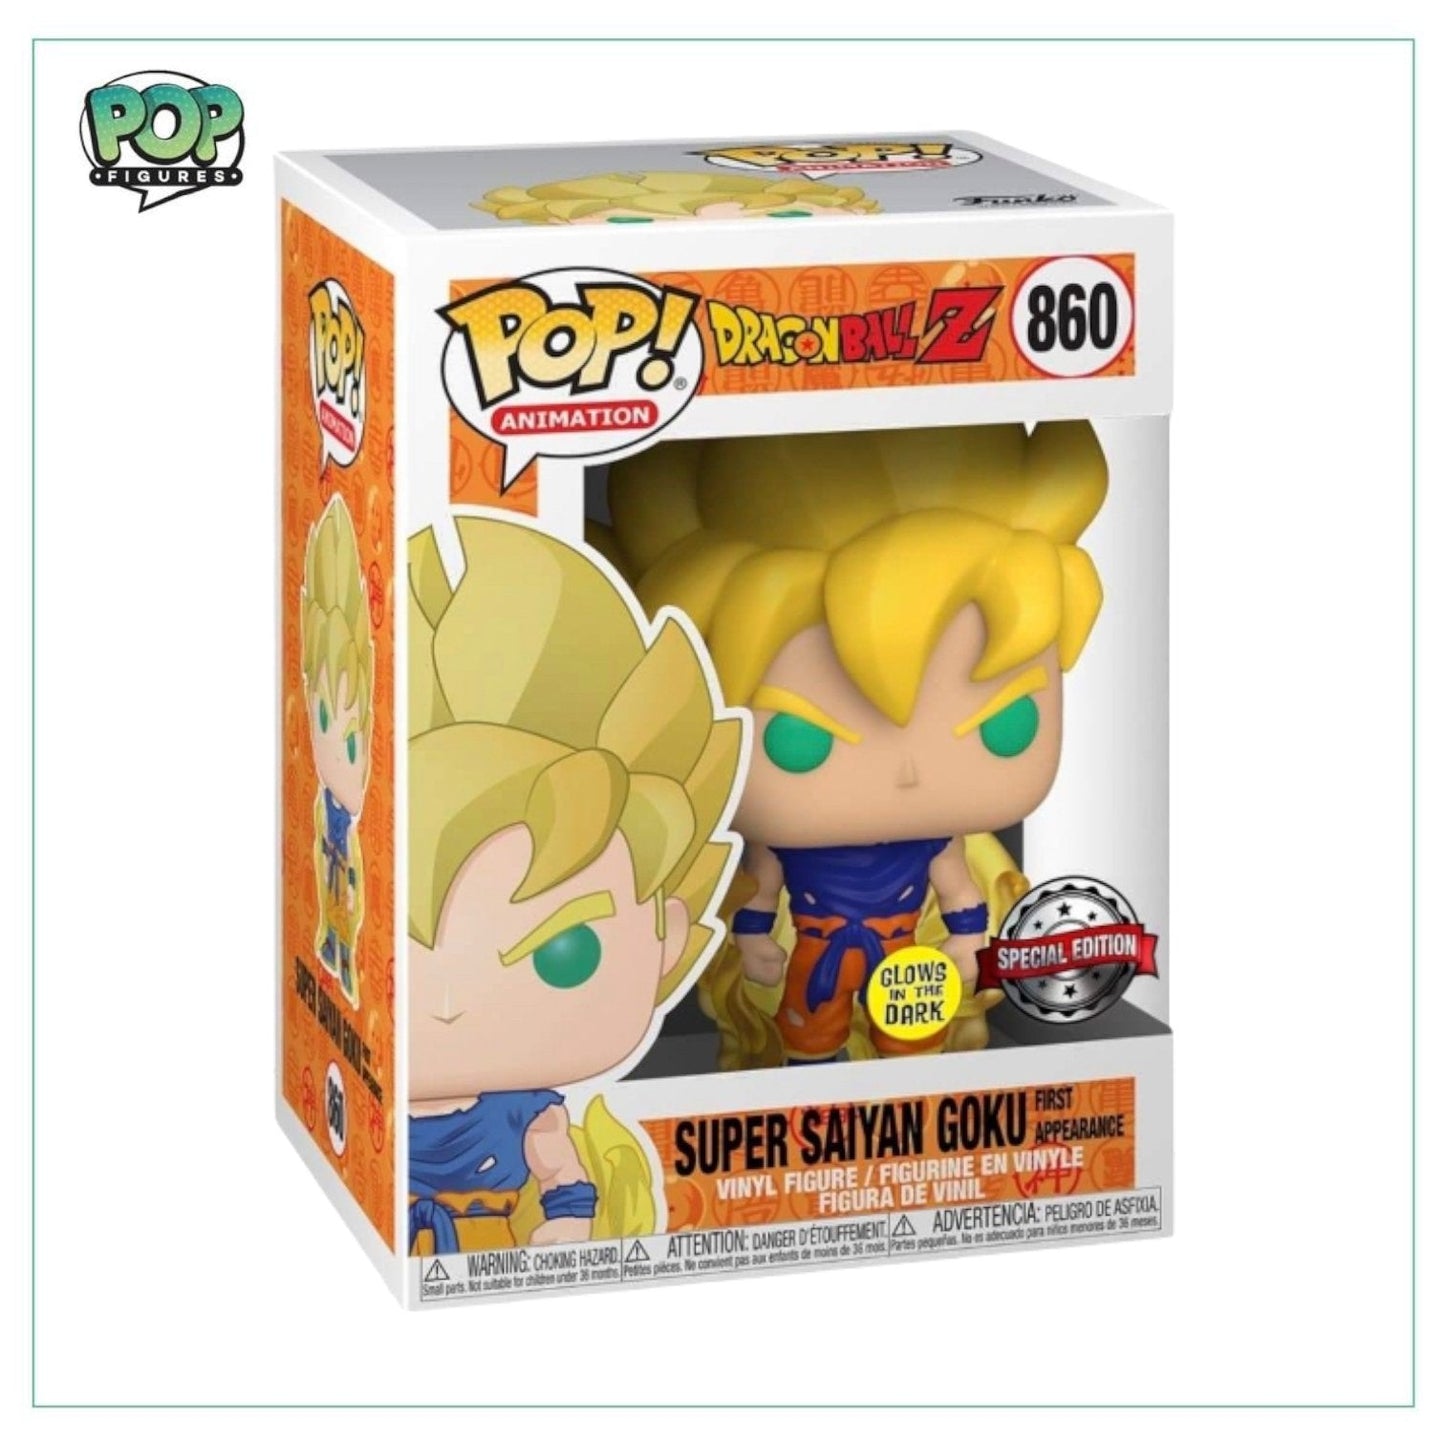 Super Saiyan Goku First Appearance (Glow In The Dark) #860 Funko Pop! Dragon Ball Z, Special Edition - Angry Cat